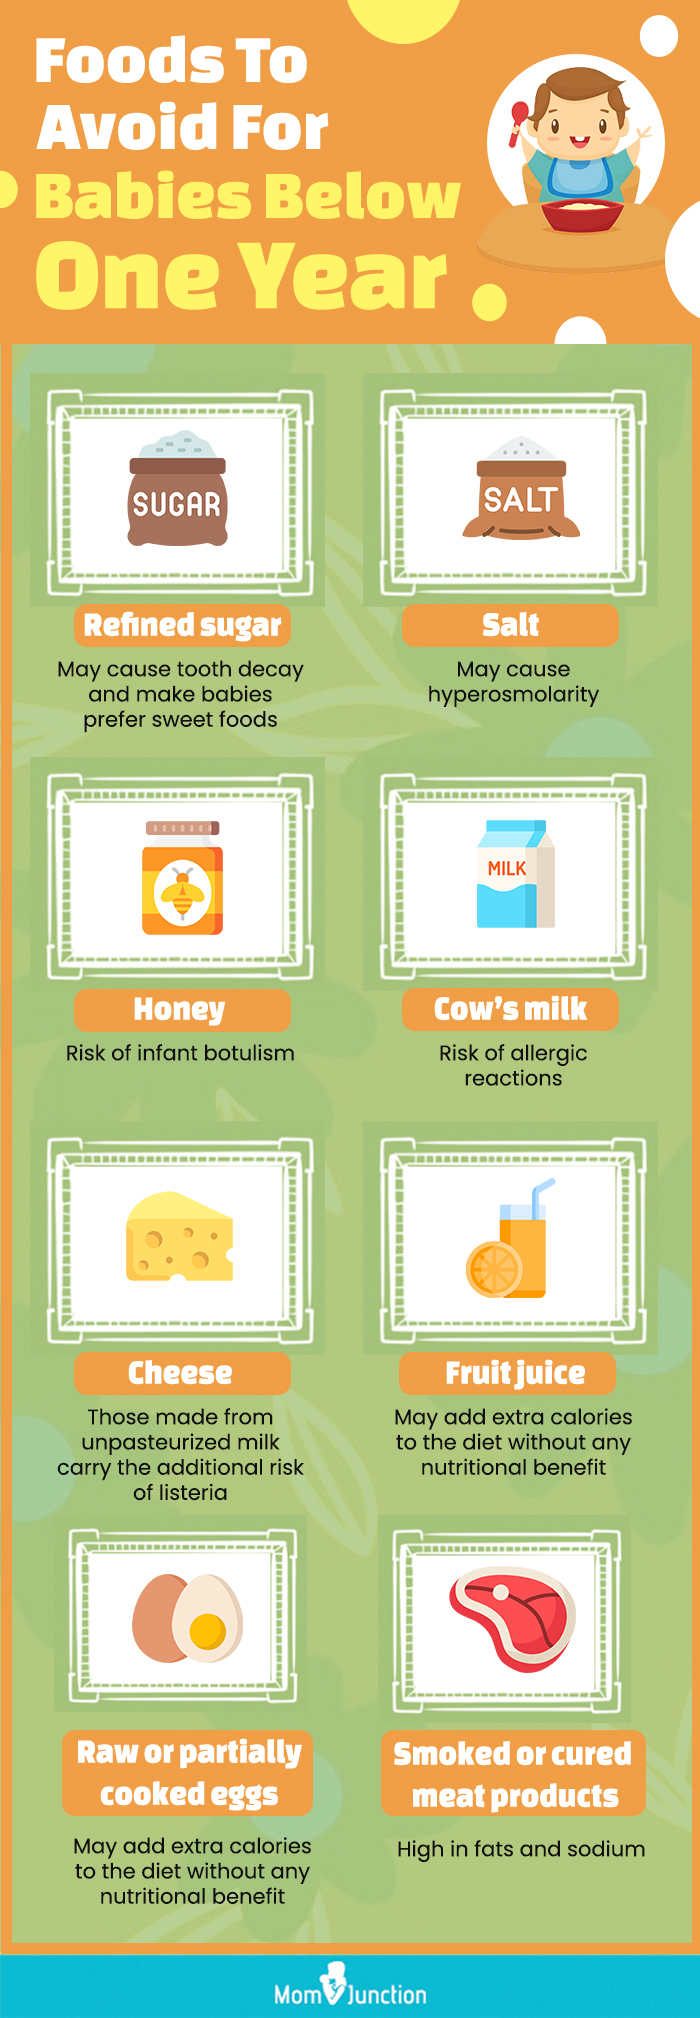 foods to avoid for babies below one year (infographic)